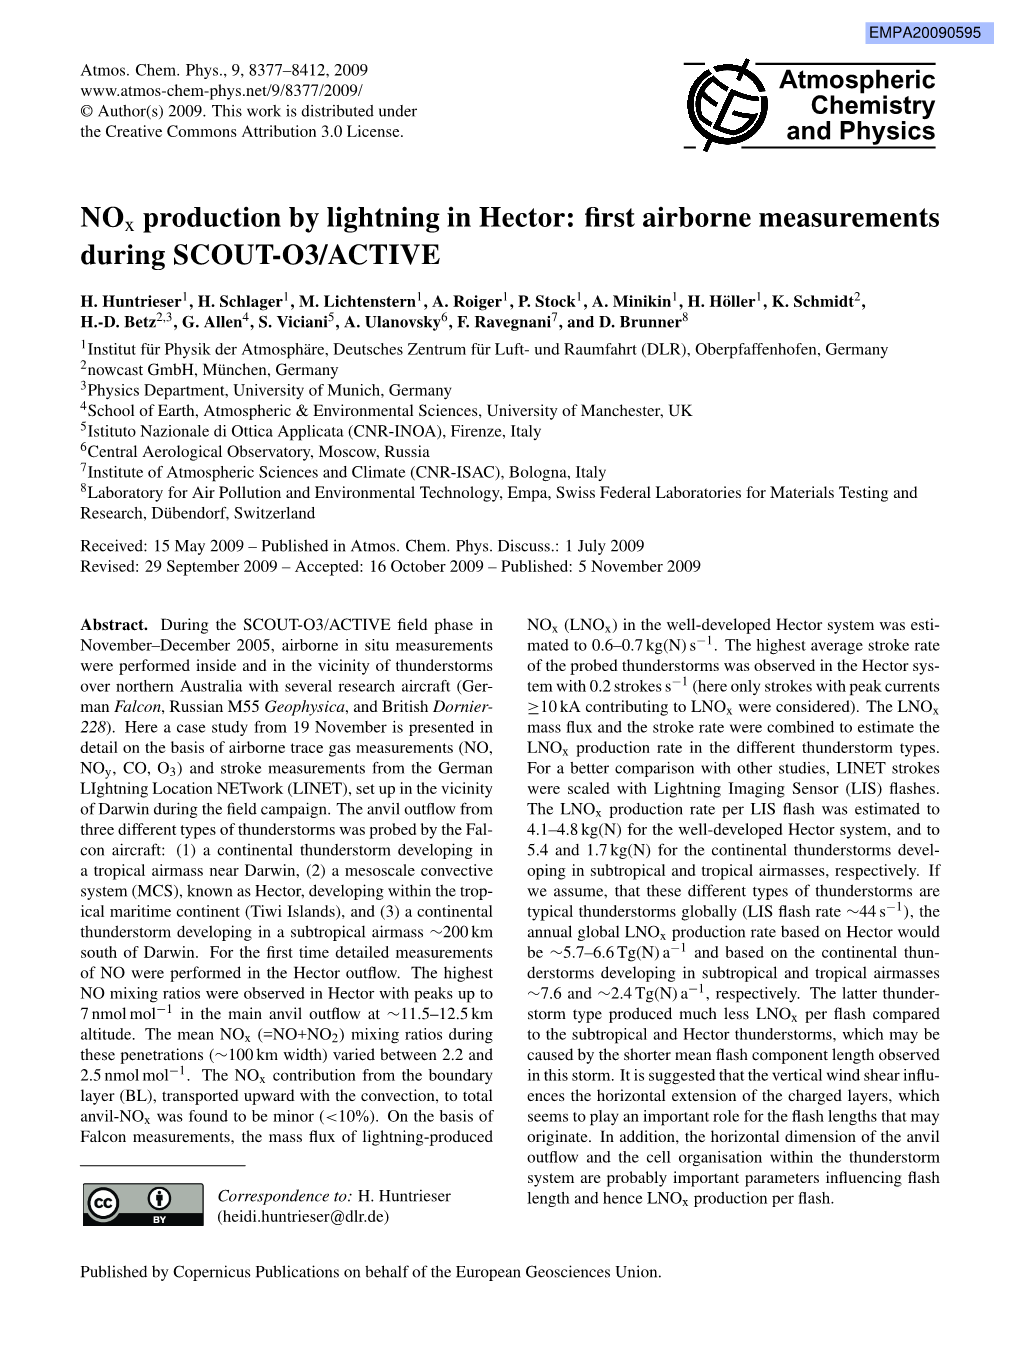 Nox Production by Lightning in Hector: First Airborne Measurements During